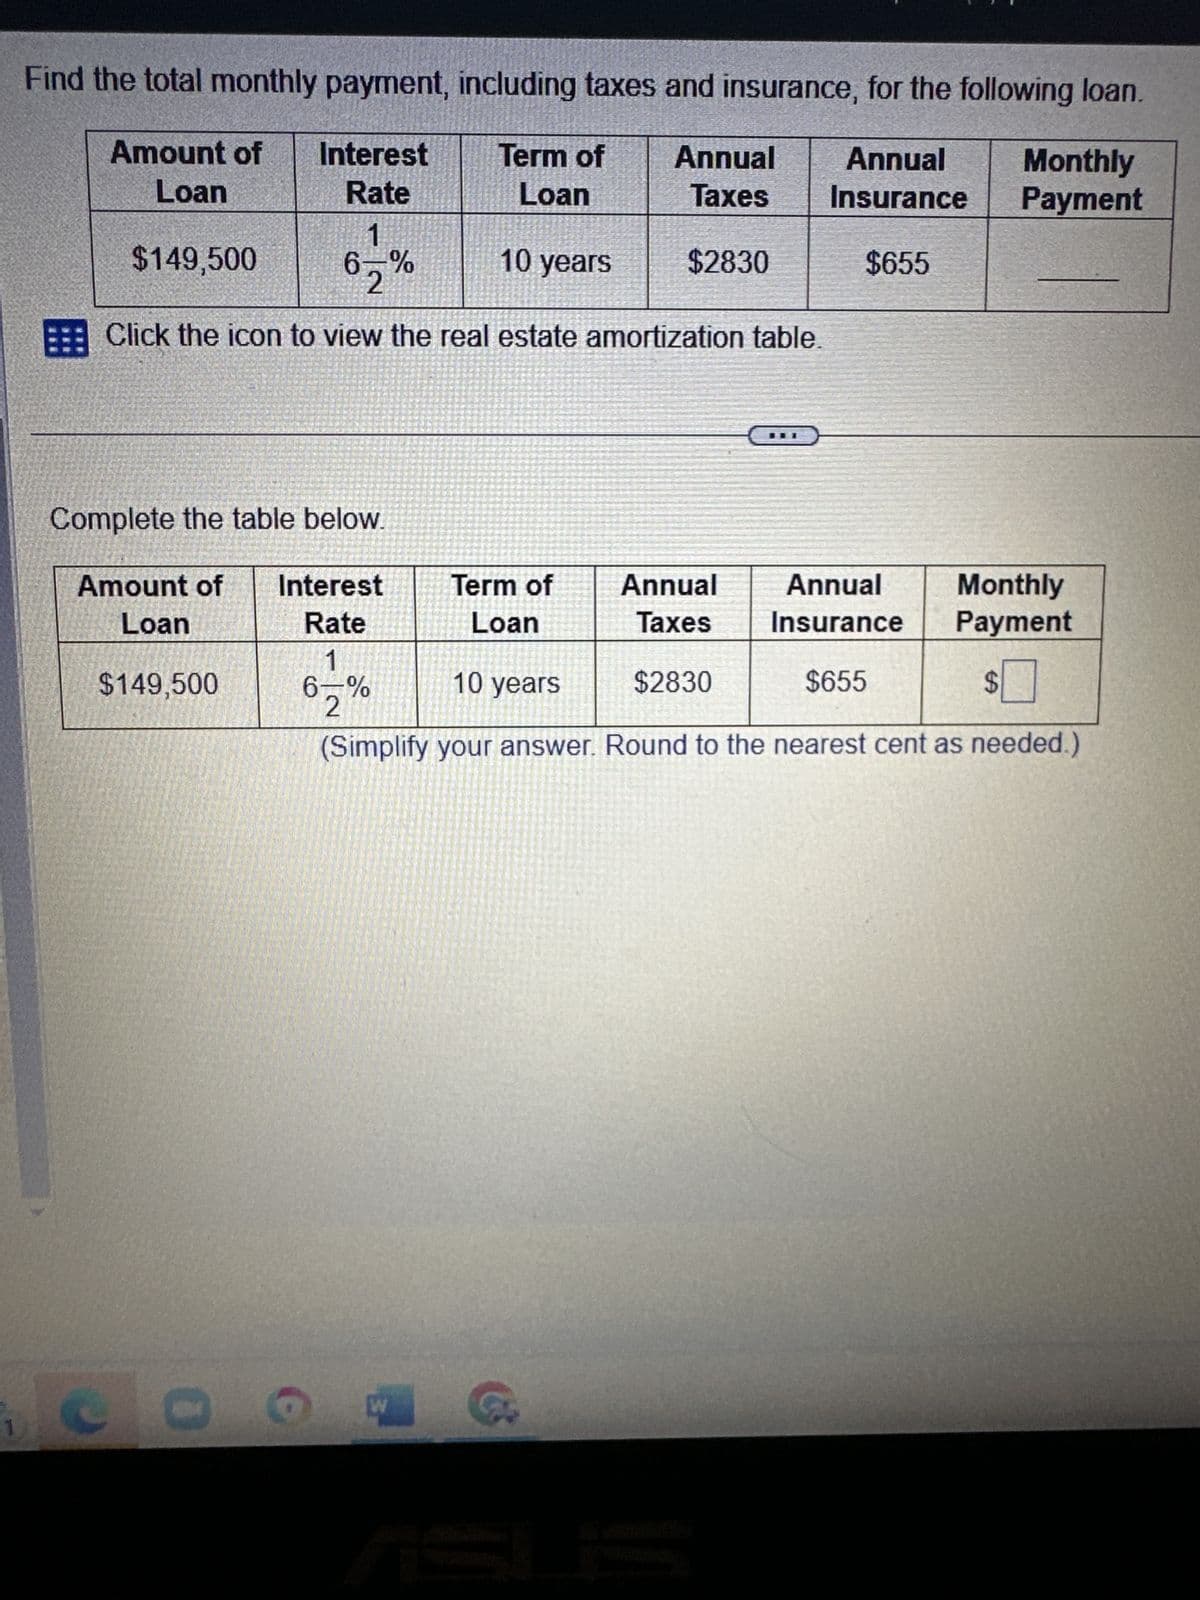 1
Find the total monthly payment, including taxes and insurance, for the following loan.
Annual Annual
Amount of
Loan
Term of
Loan
Taxes
Insurance
Interest
Rate
1
6-%
$149,500
10 years
$2830
$655
Click the icon to view the real estate amortization table.
Complete the table below.
Amount of
Loan
$149,500
0
Interest
Rate
1
6-%
2
Term of
Loan
W
Annual
Taxes
$2830
F
Monthly
Payment
Annual
Insurance
$655
10 years
(Simplify your answer. Round to the nearest cent as needed.)
Monthly
Payment
$